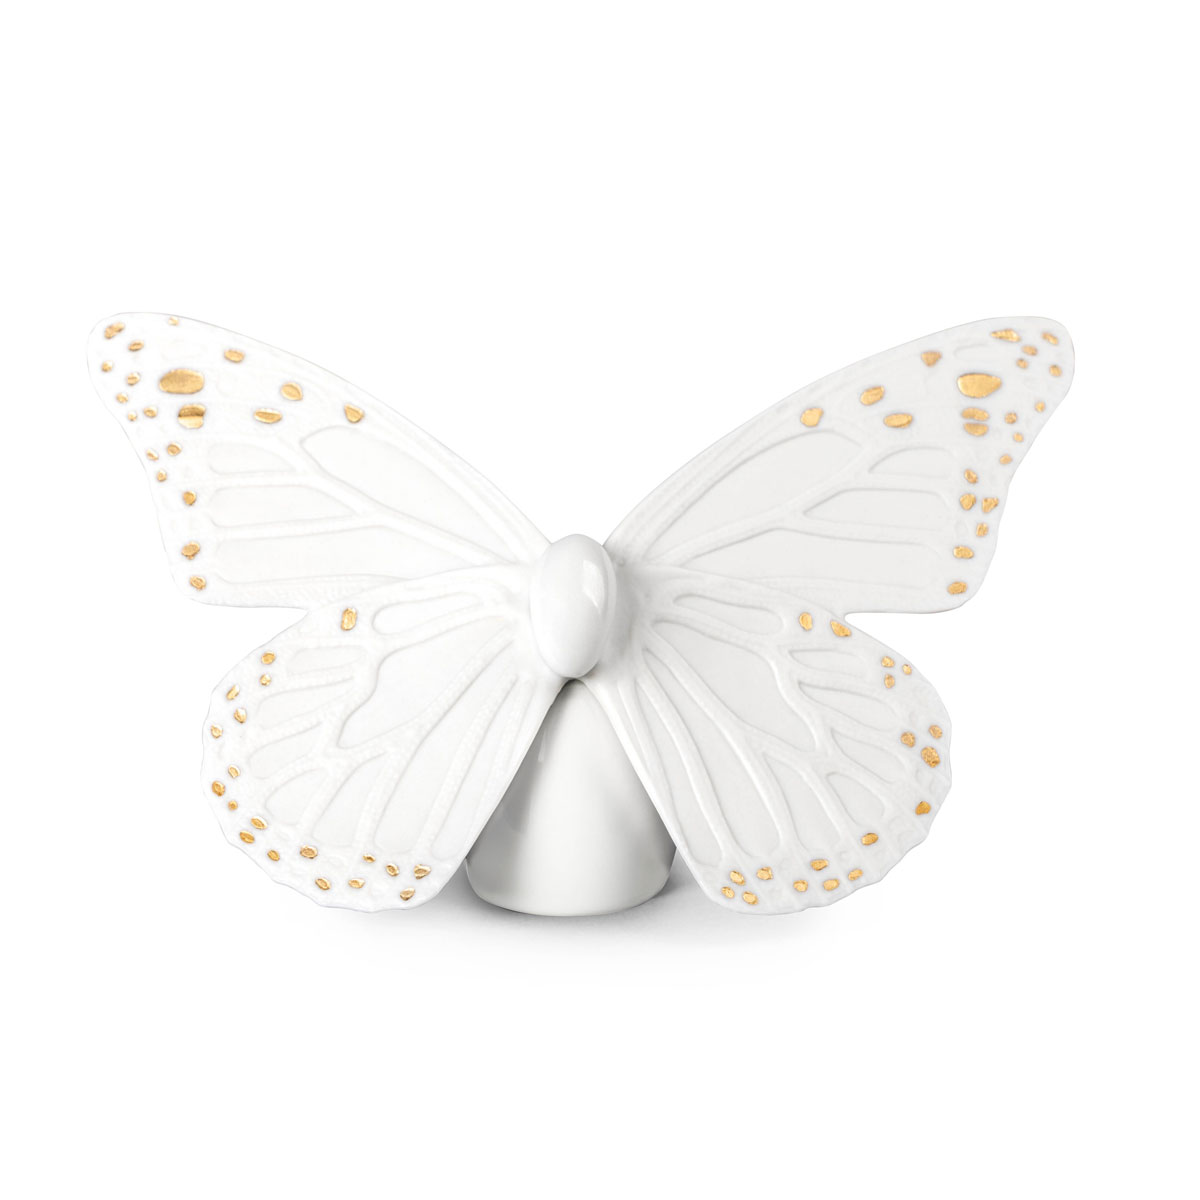 Lladro Classic Sculpture, Butterfly Figurine. Golden Luster And White